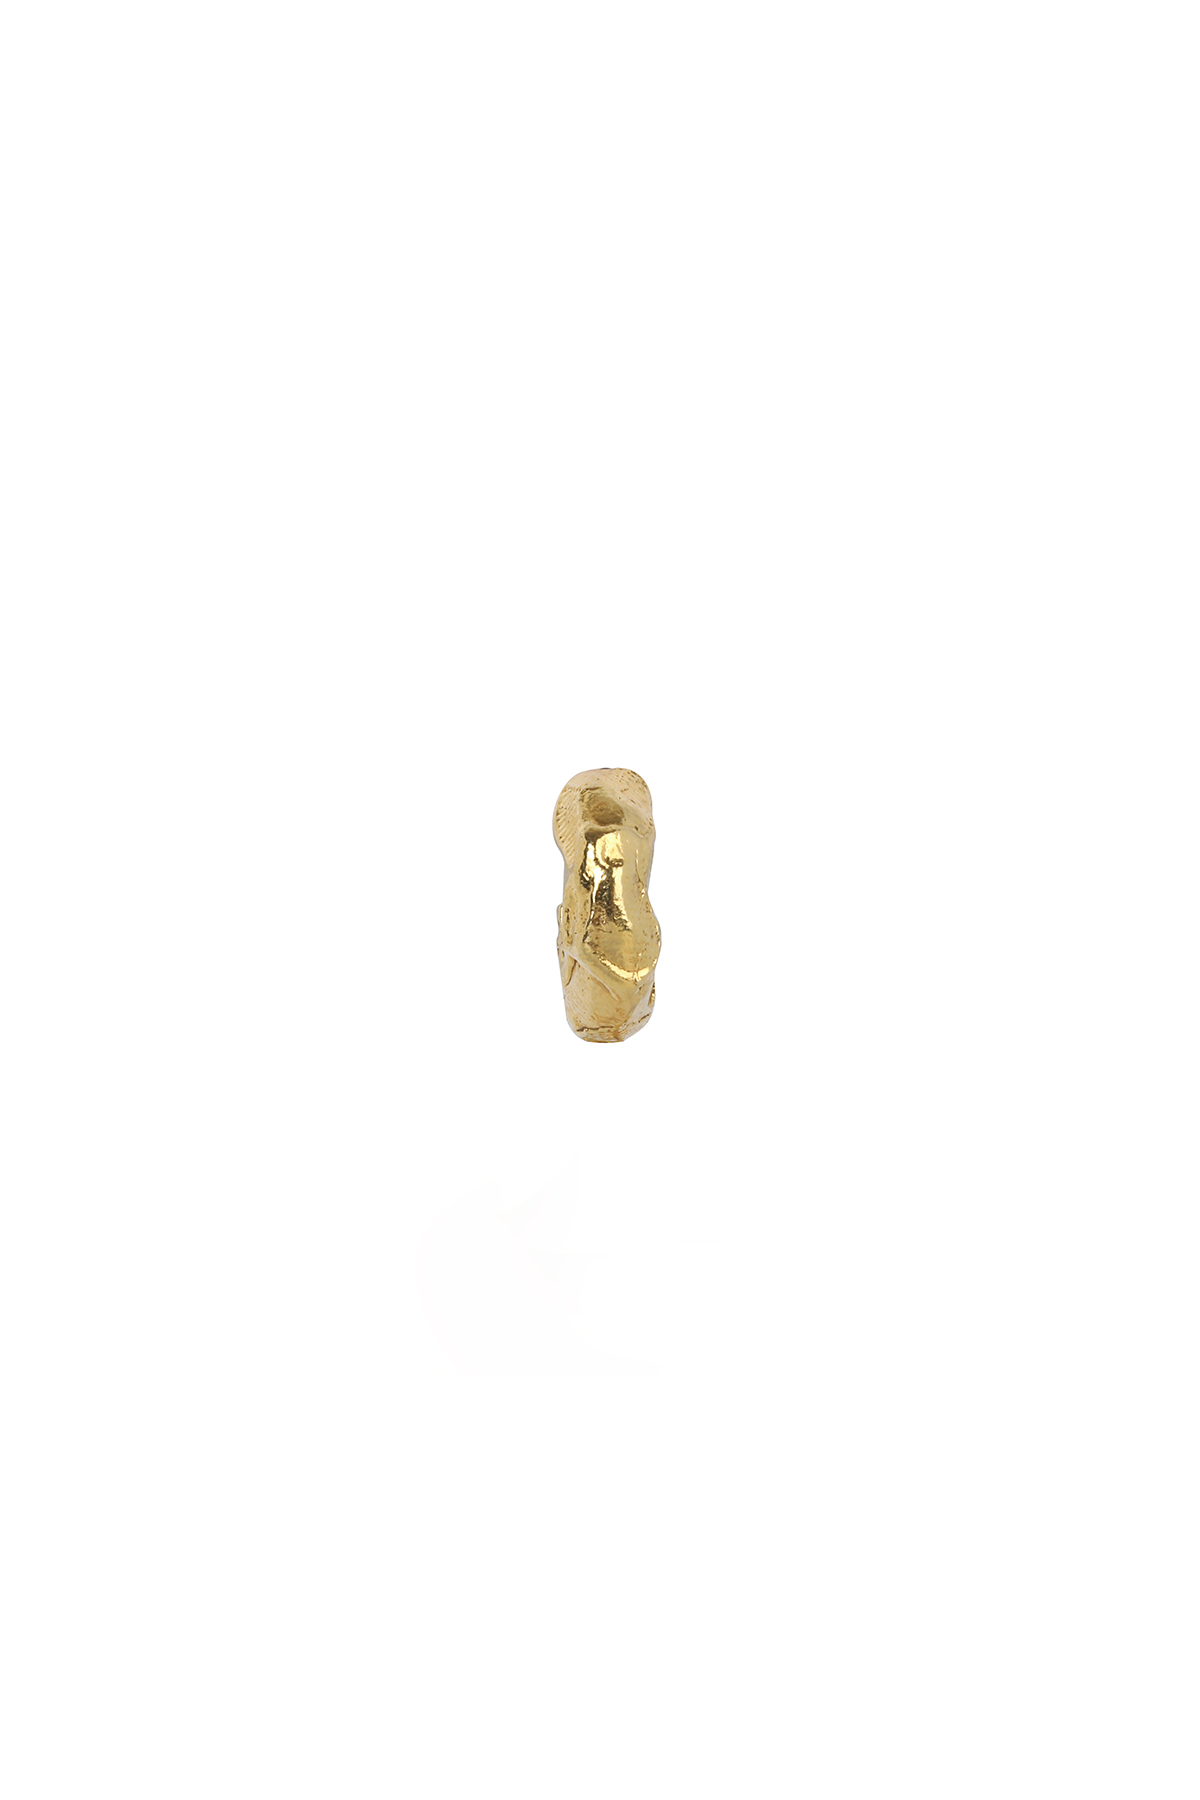 TEXTURE BOLD EARRING GOLD